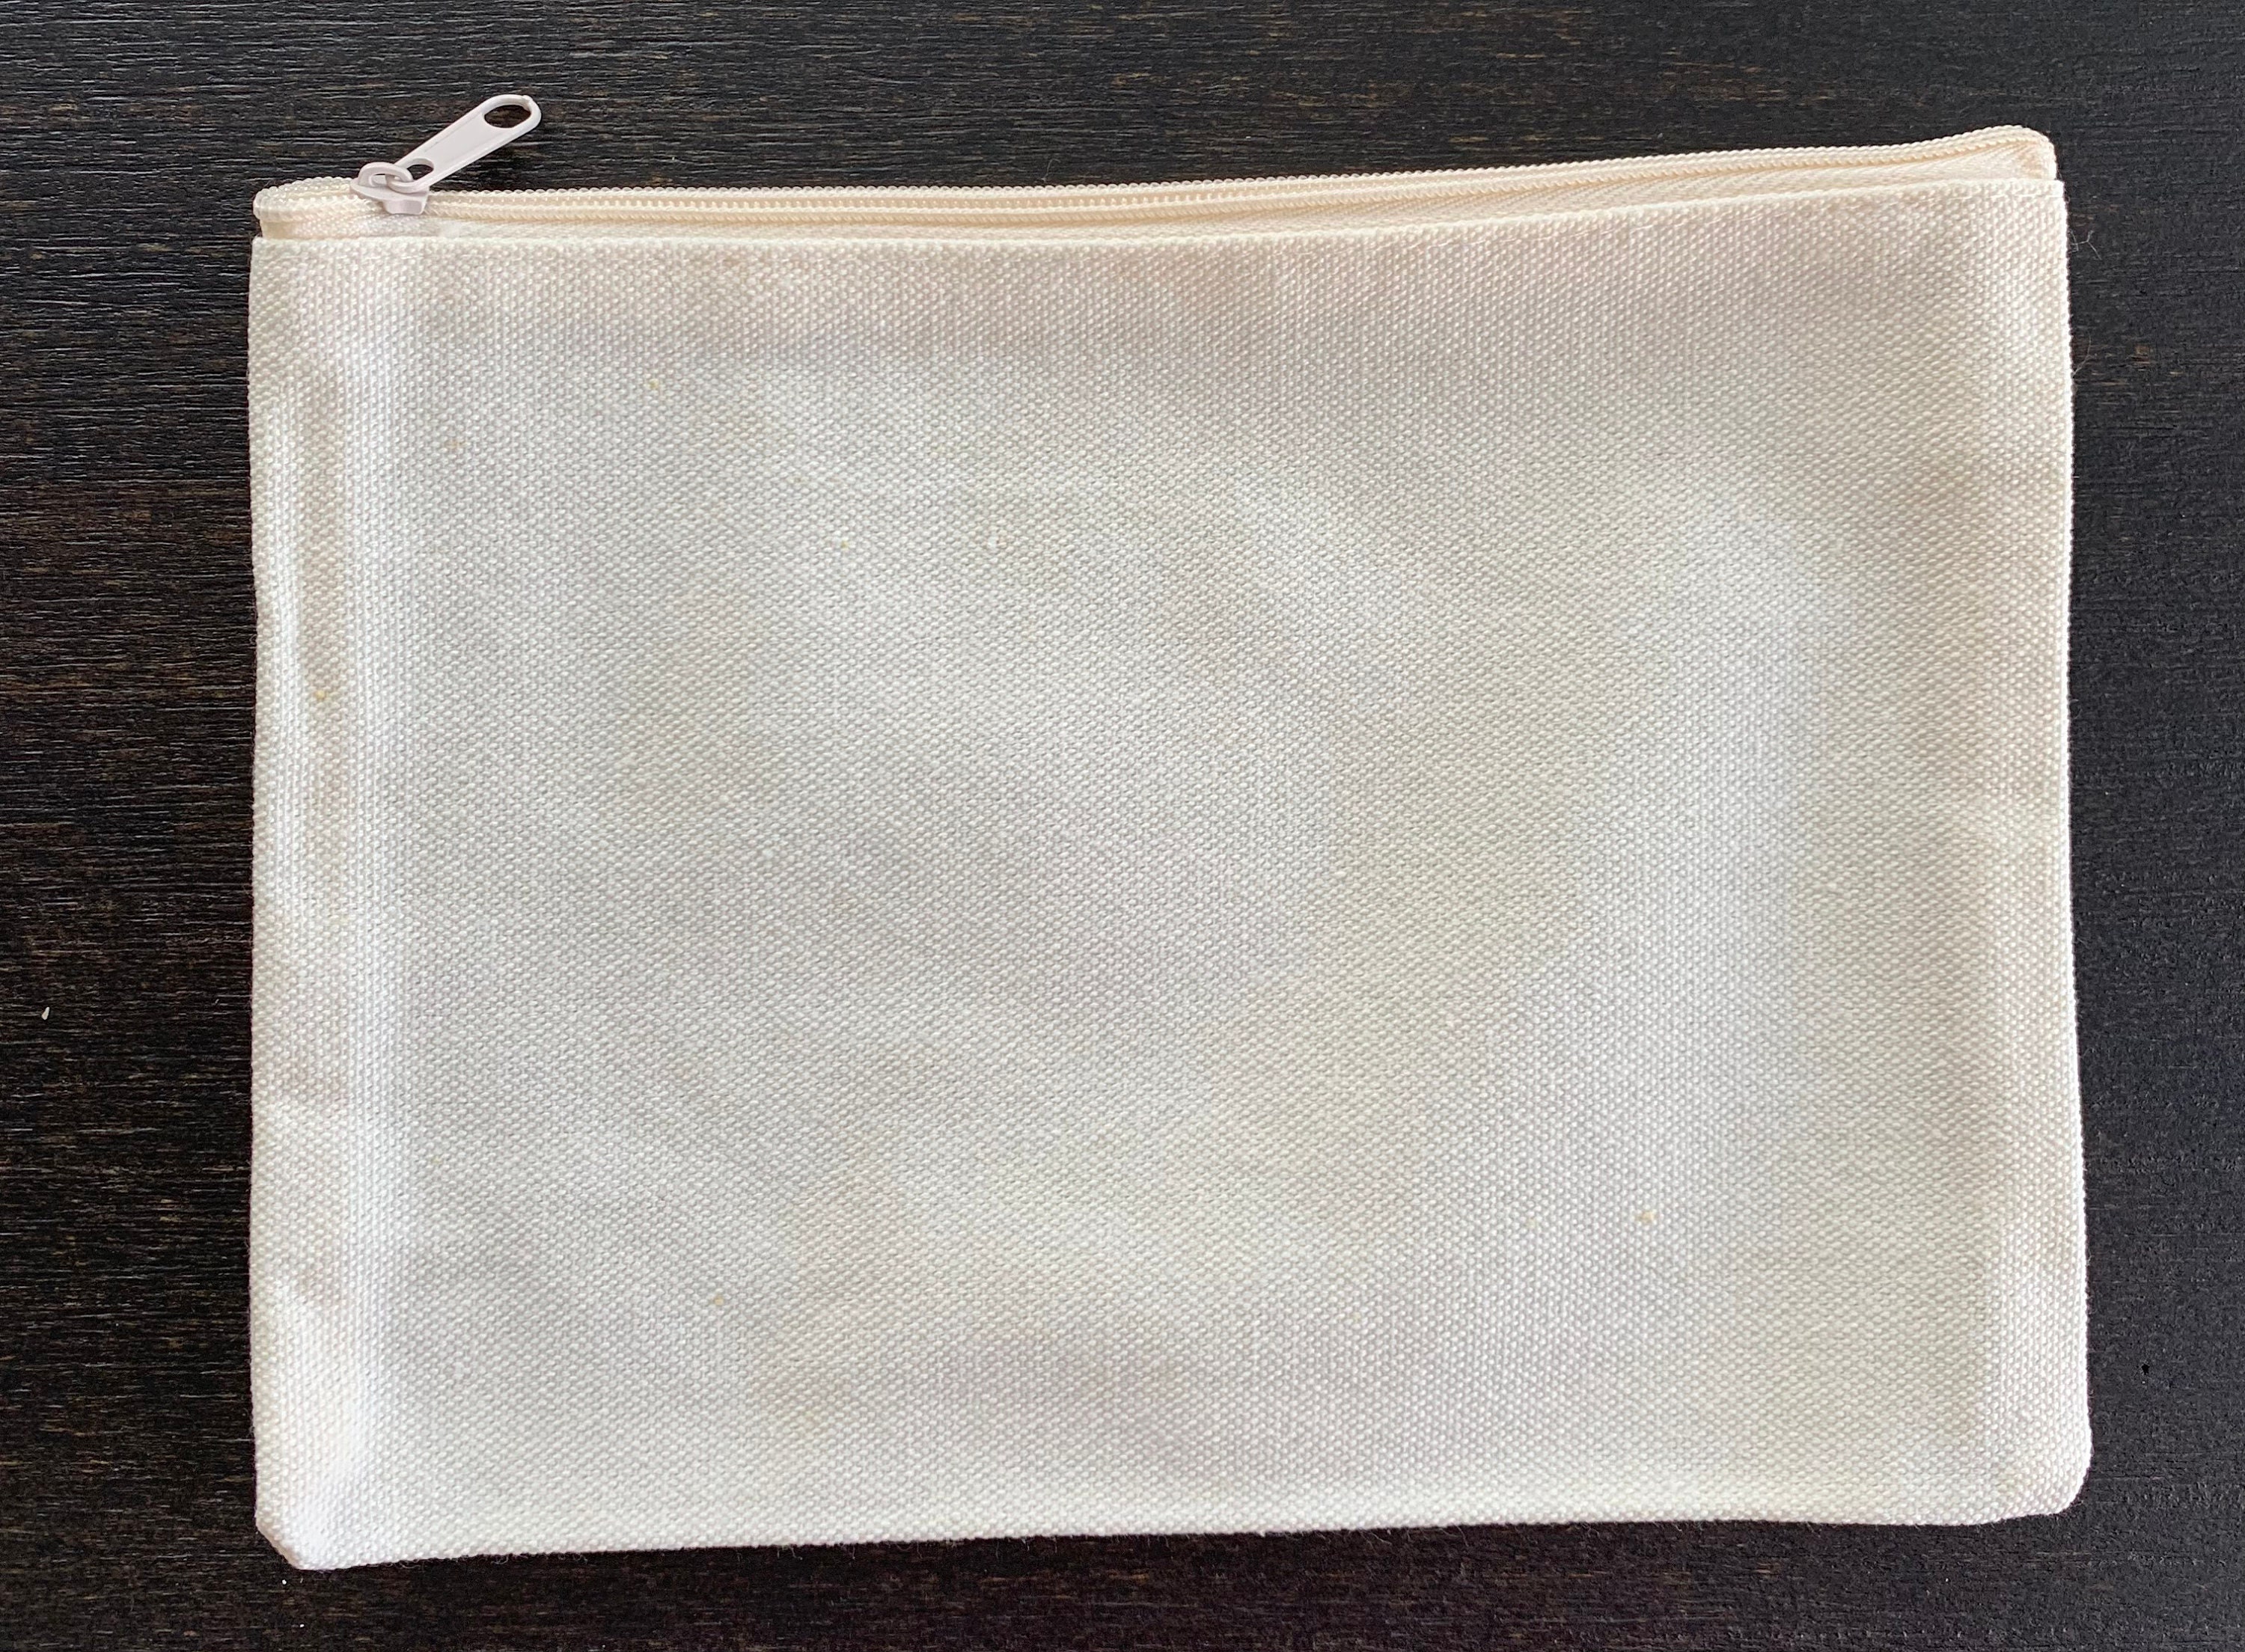 Canvas Cosmetic Bag With Sewn Logo Label